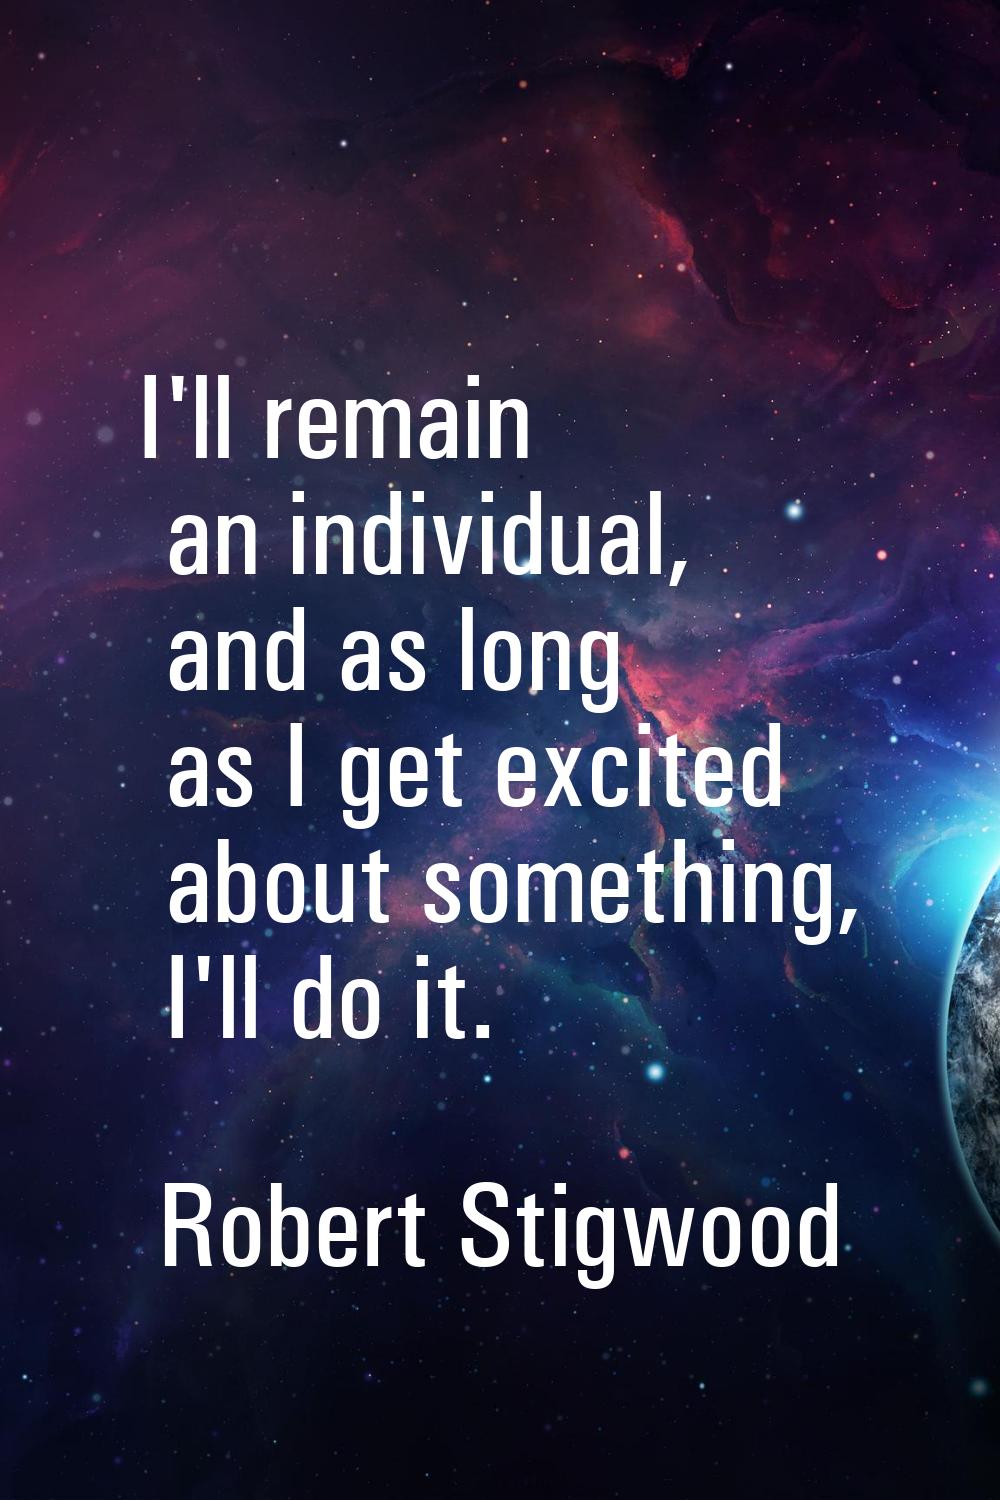 I'll remain an individual, and as long as I get excited about something, I'll do it.